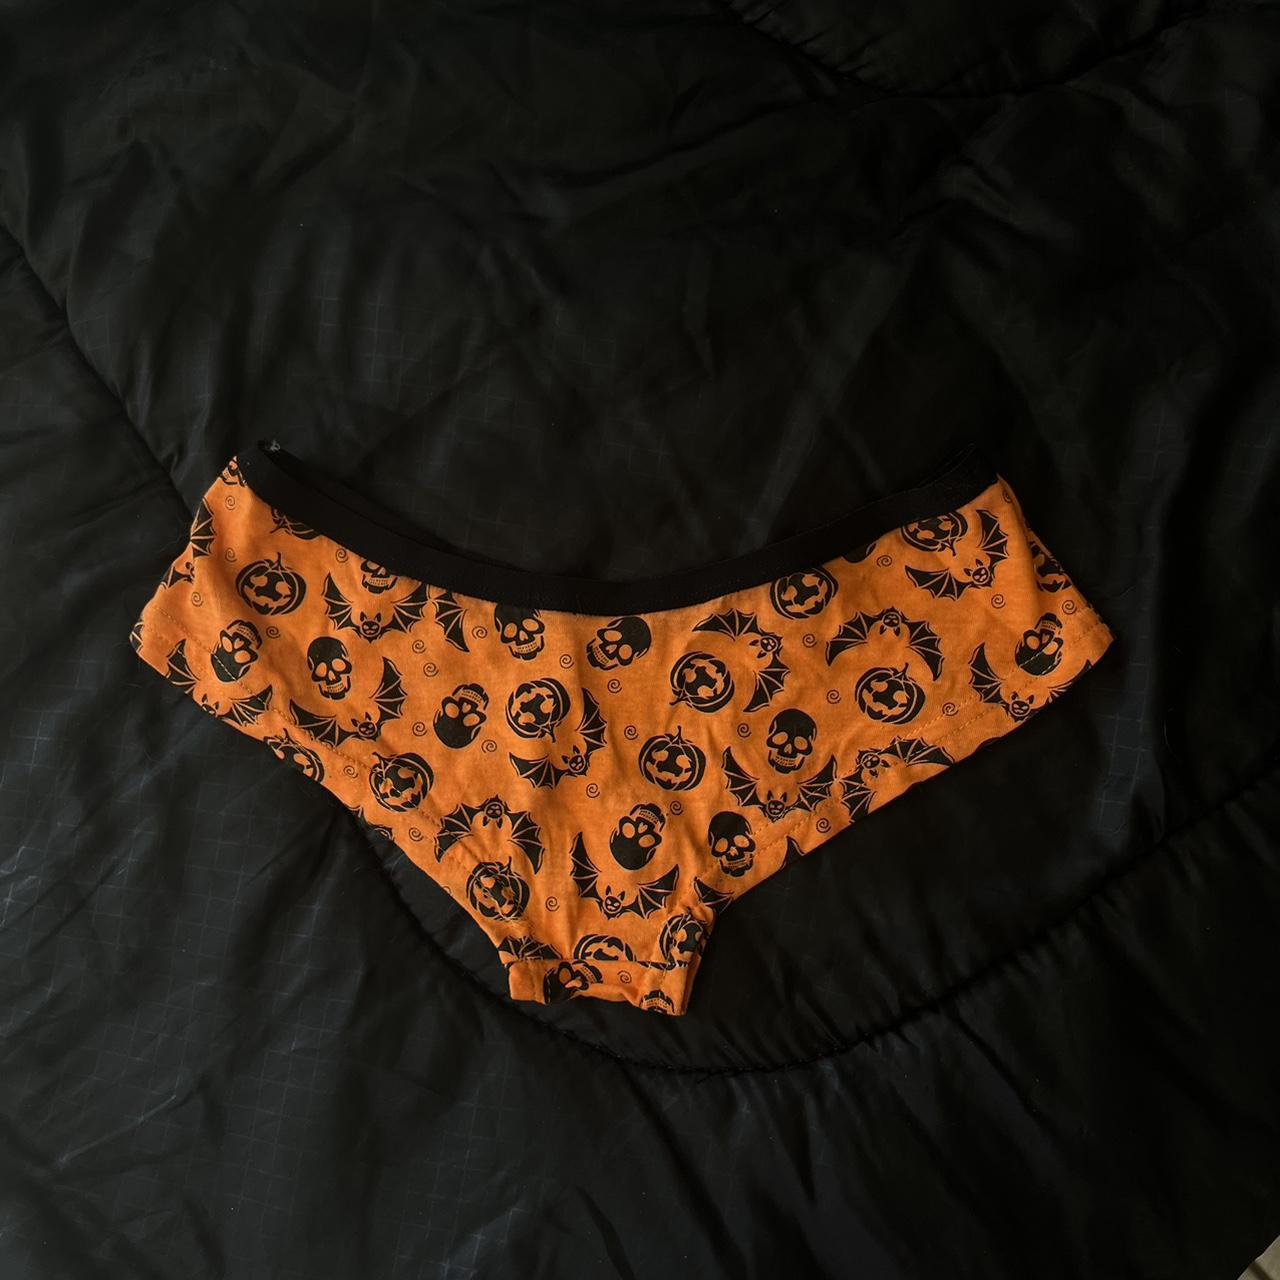 Halloween undies I think they are hipster or cheeky - Depop